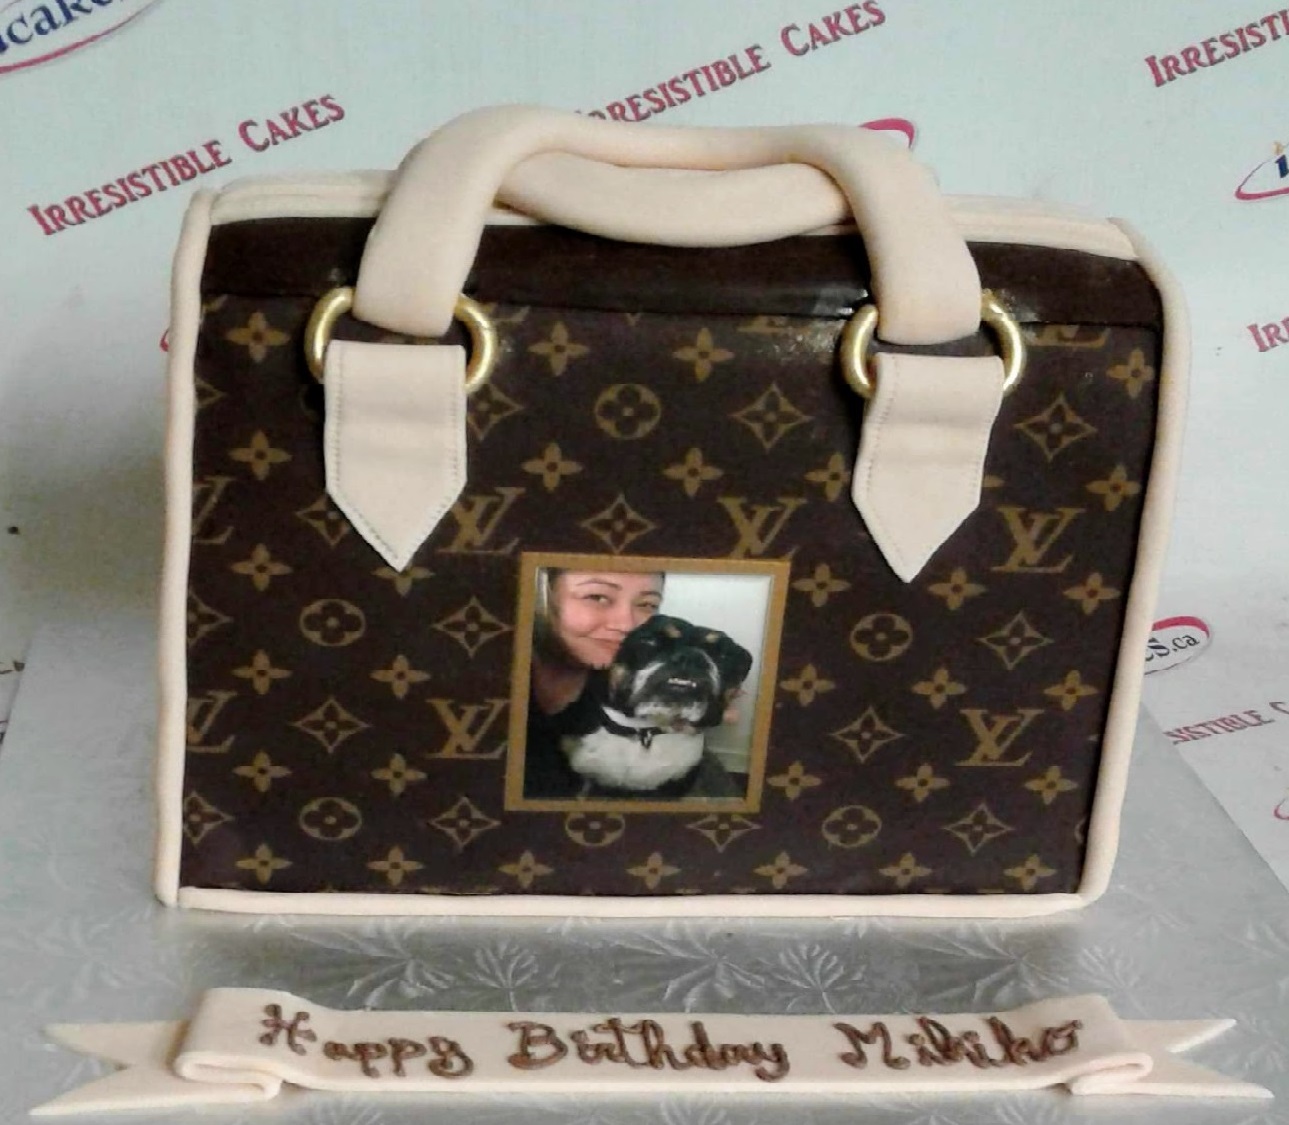 Purse Cake For 40Th Birthday - CakeCentral.com